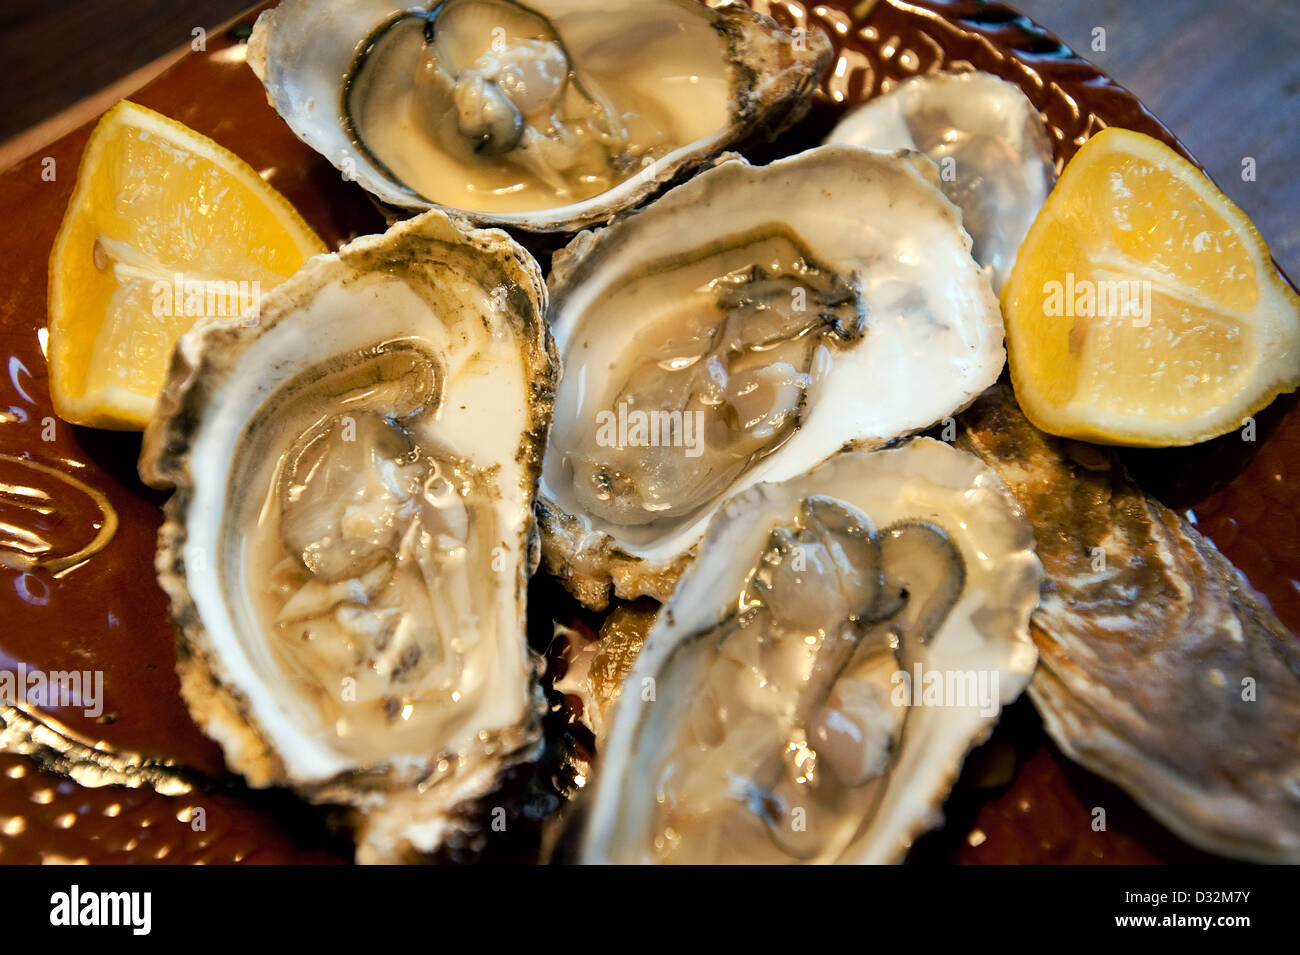 Oysters prepared to eat Stock Photo